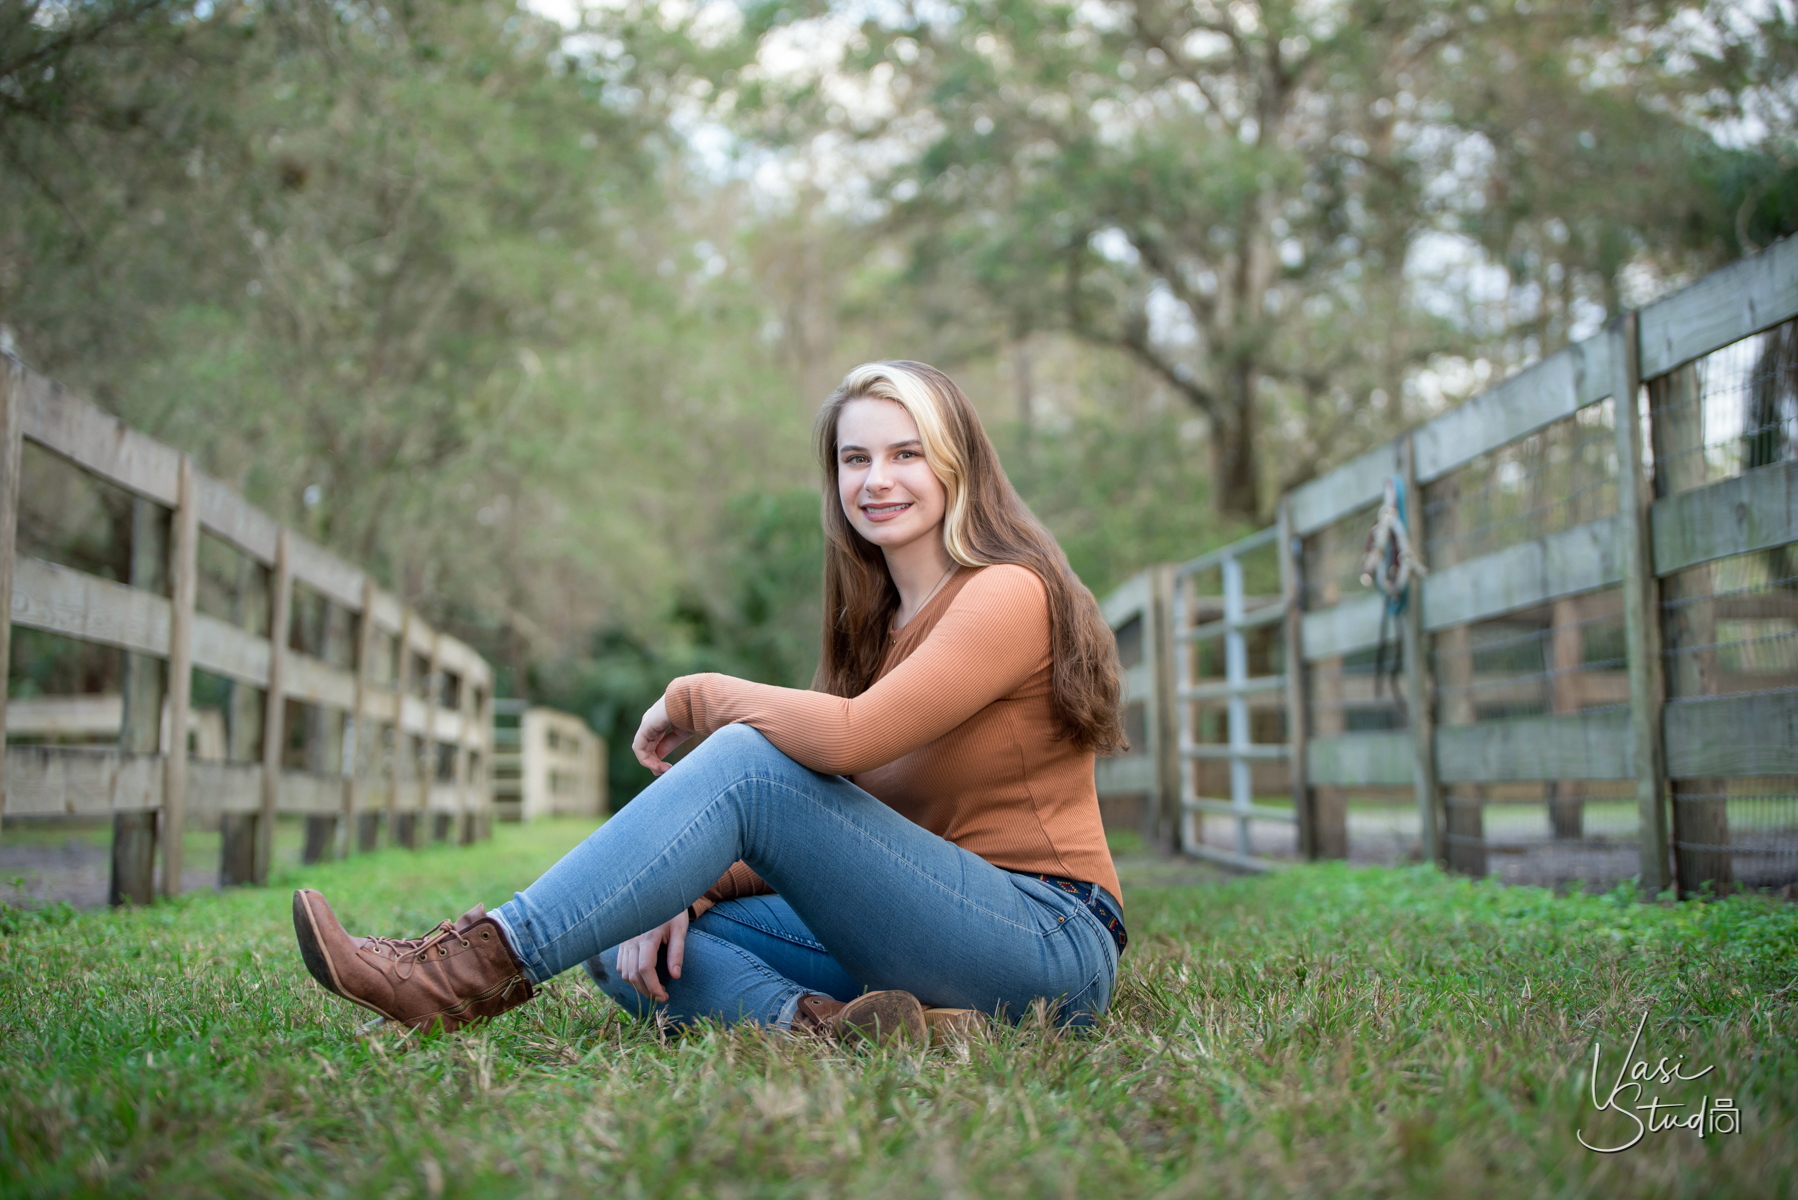 Senior pictures on location Royal Palm Beach Florida